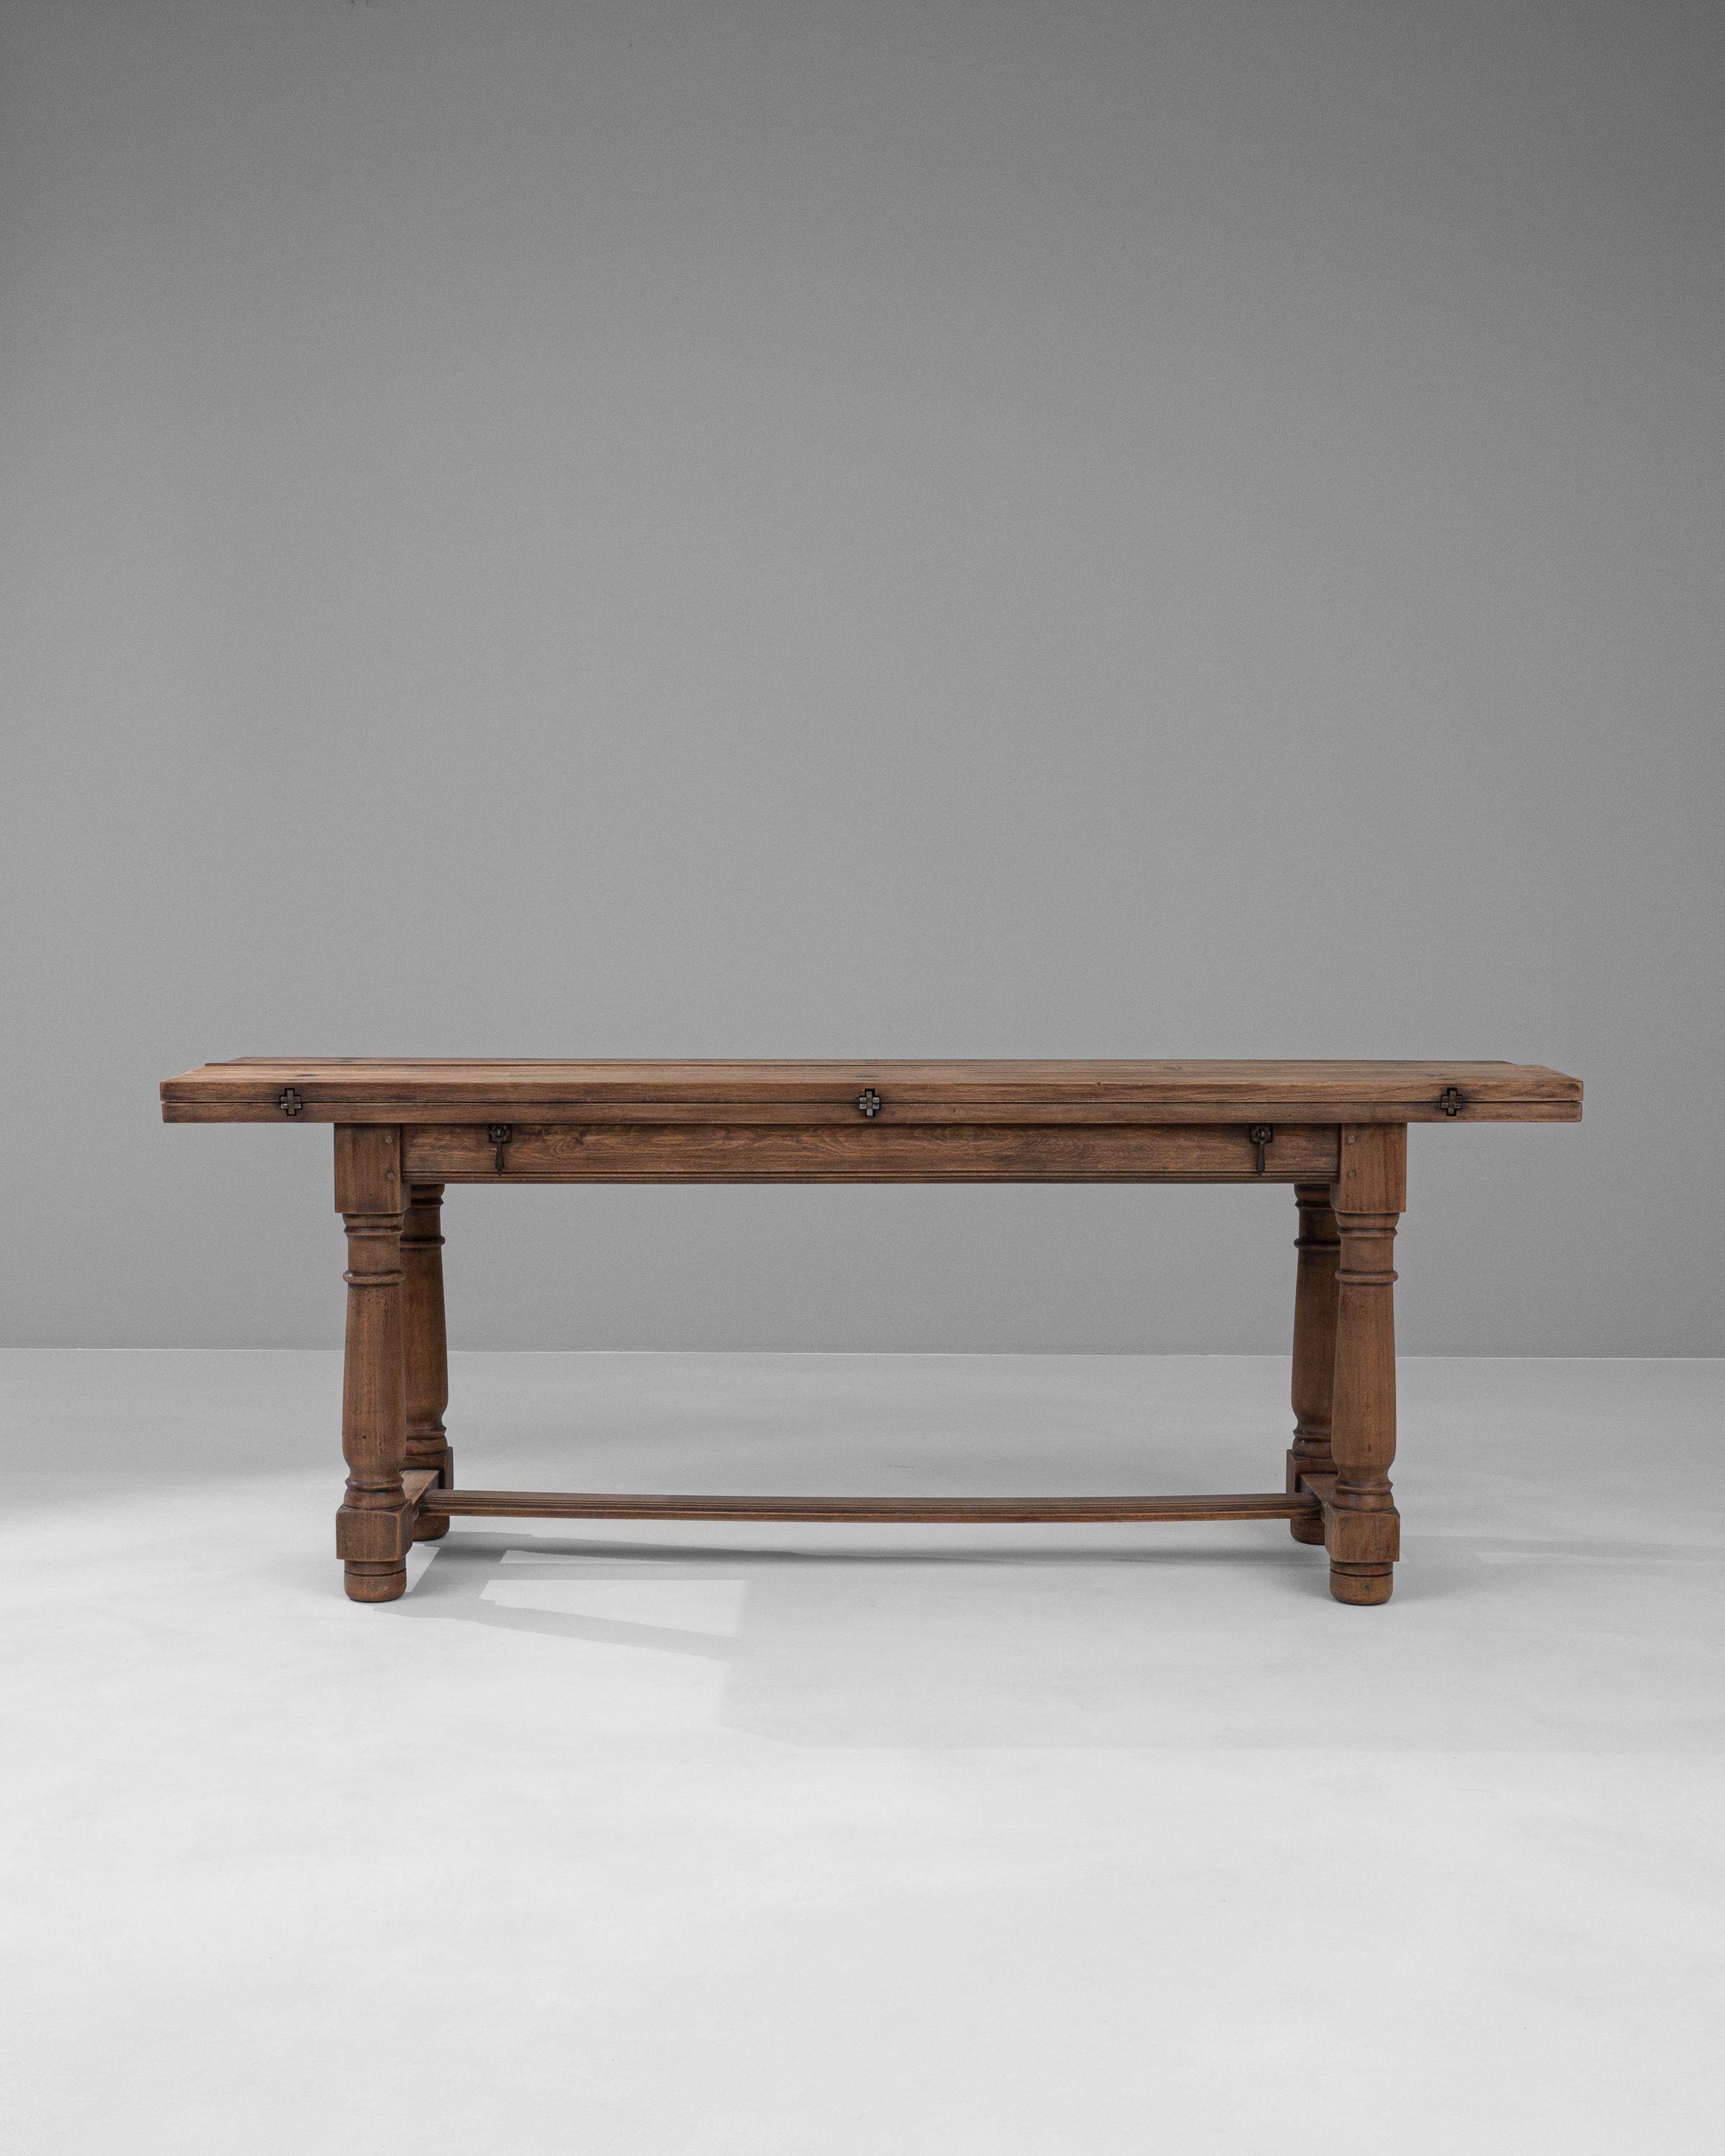 Step into a world of timeless elegance with our 1900s French Wooden Folding Table. Meticulously crafted from rich, robust wood, this table exemplifies classic French design with its intricate carved legs and rustic charm. Its unique folding